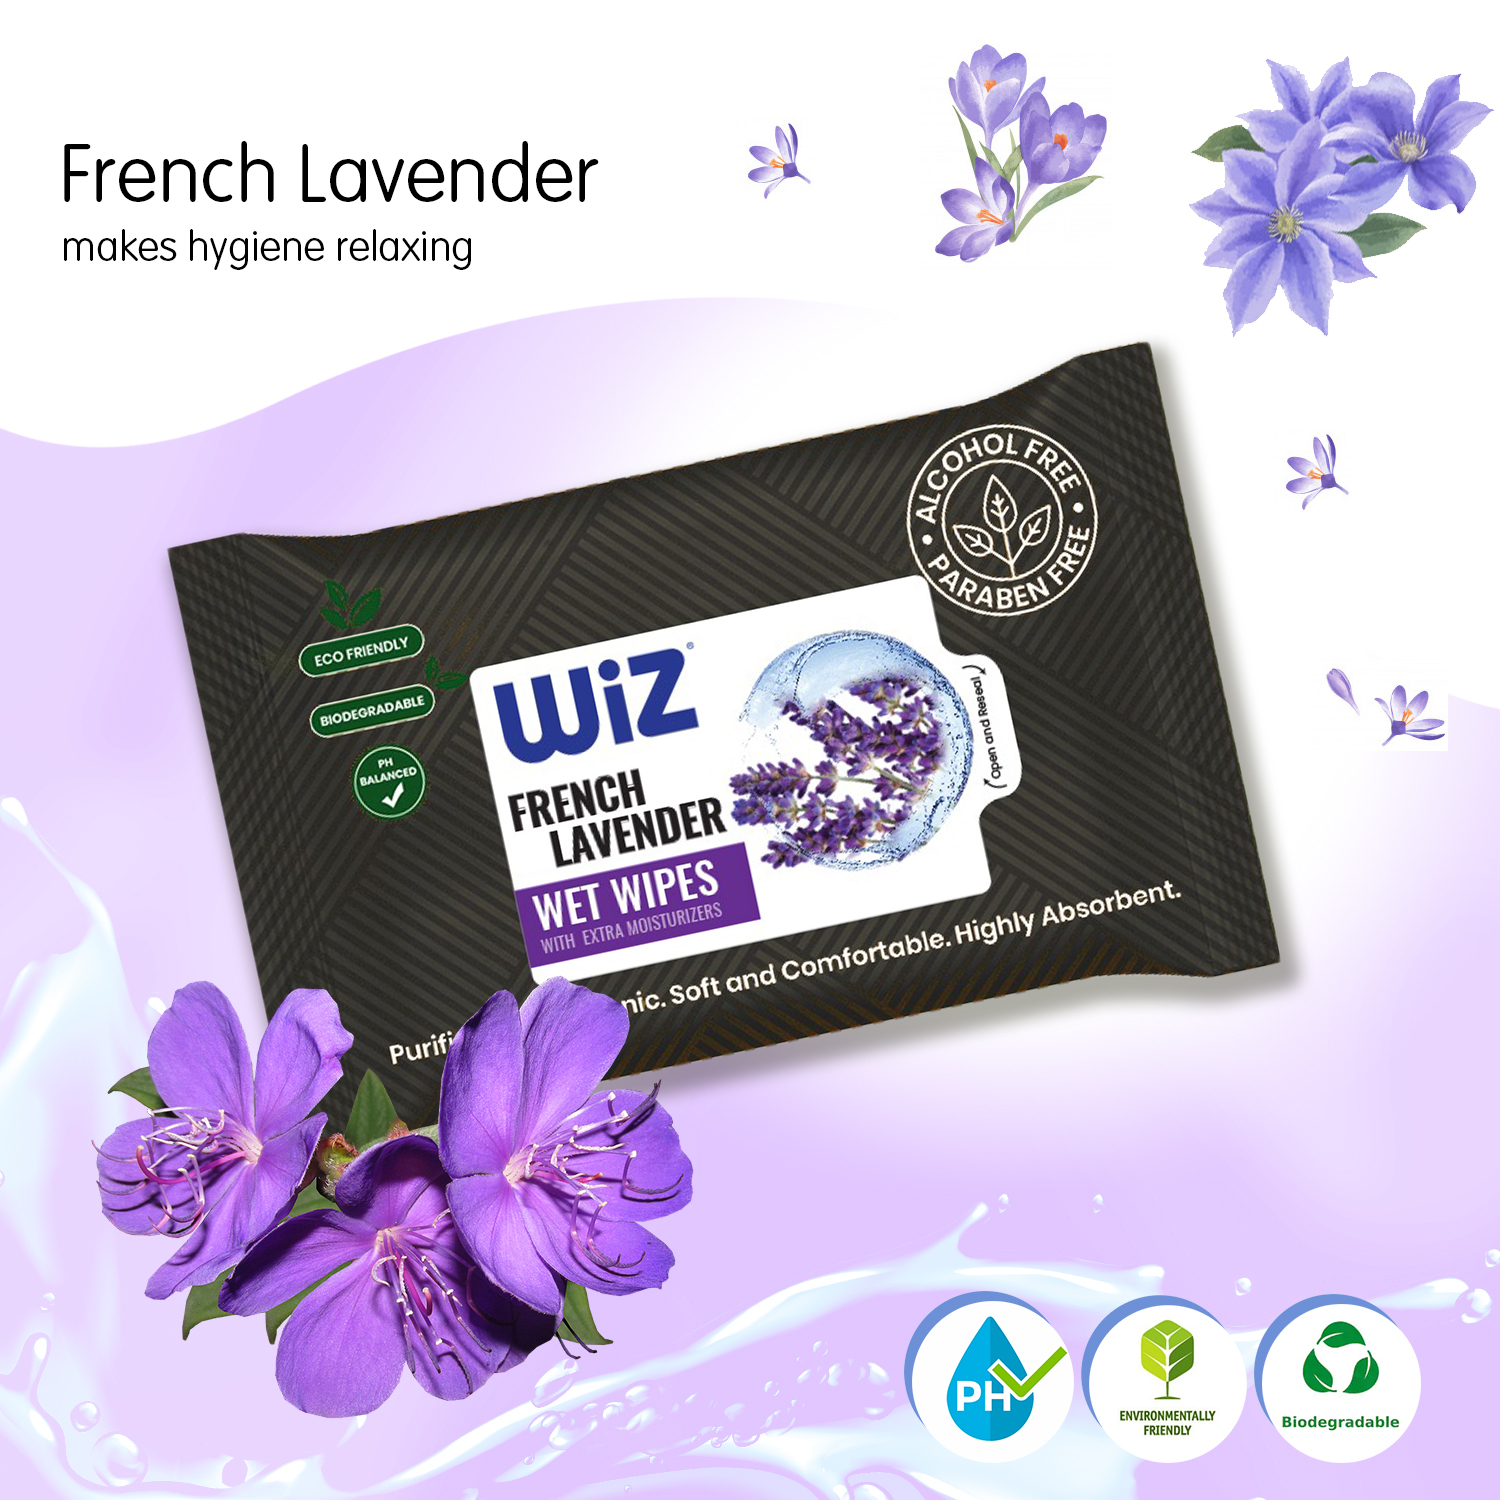 WiZ Refreshing Wet Wipes with Extra Moisturizers - 25 Pulls Pouch